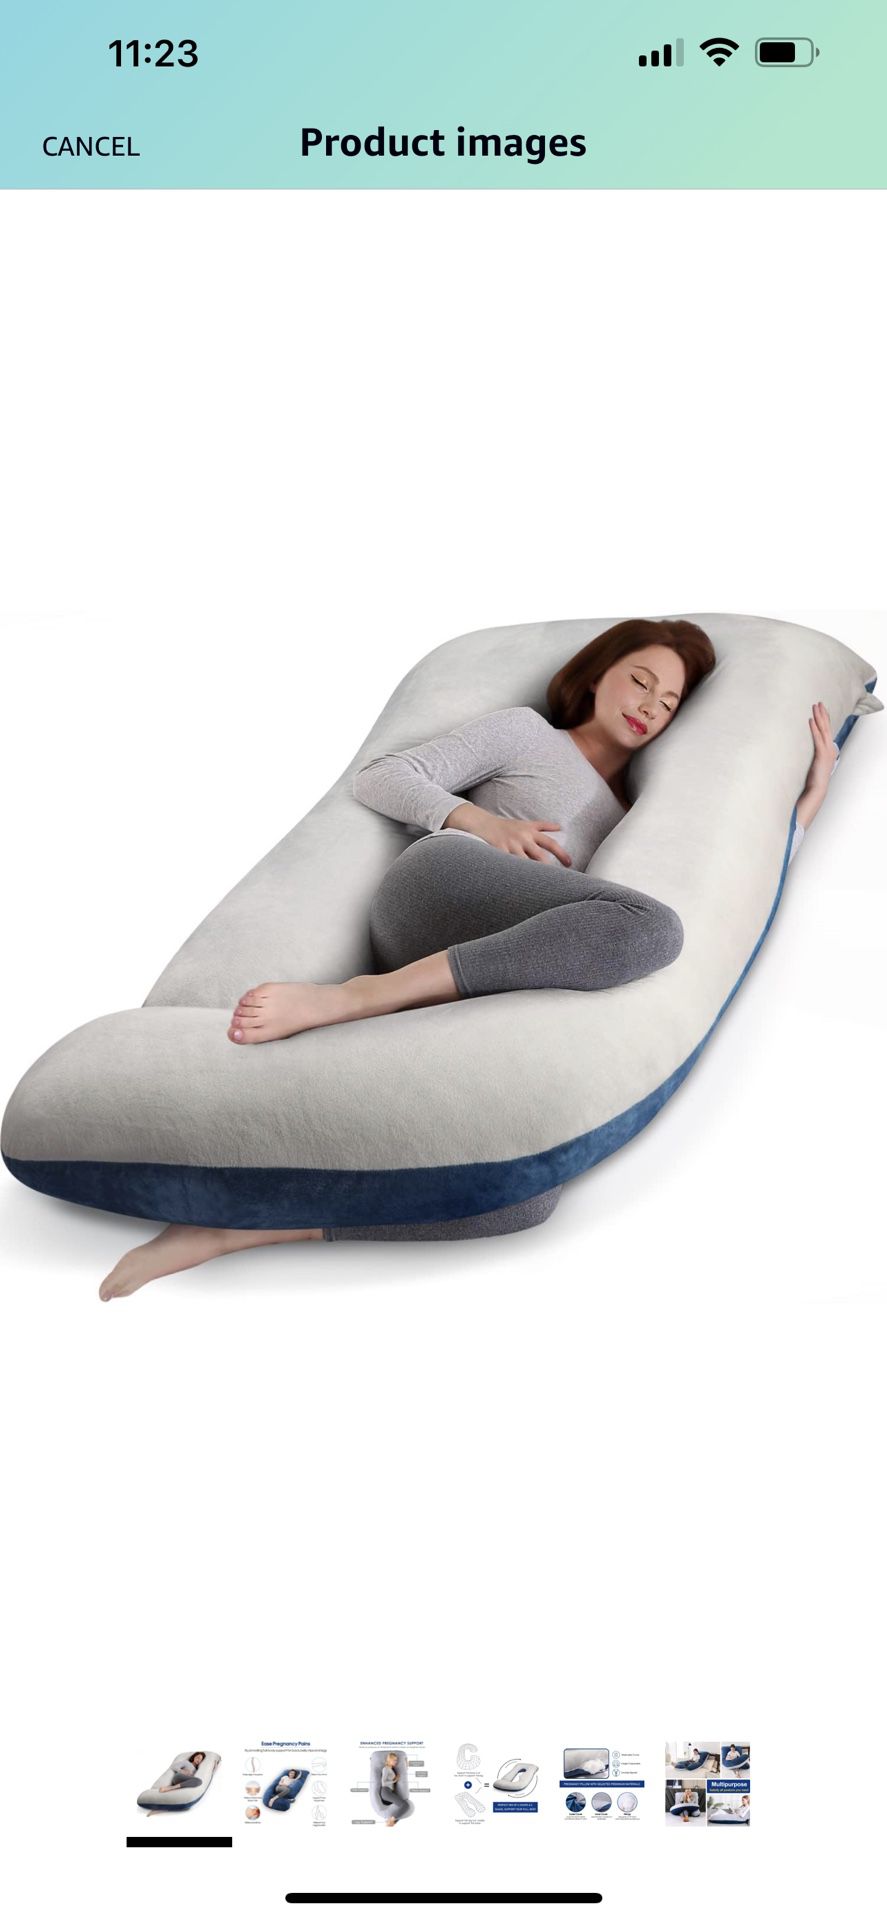 Pregnancy Pillows for Sleeping 55 Inches U-Shape Full Body Pillow and Maternity Support - for Back, Hips, Legs, Belly for Pregnant Women with Removabl